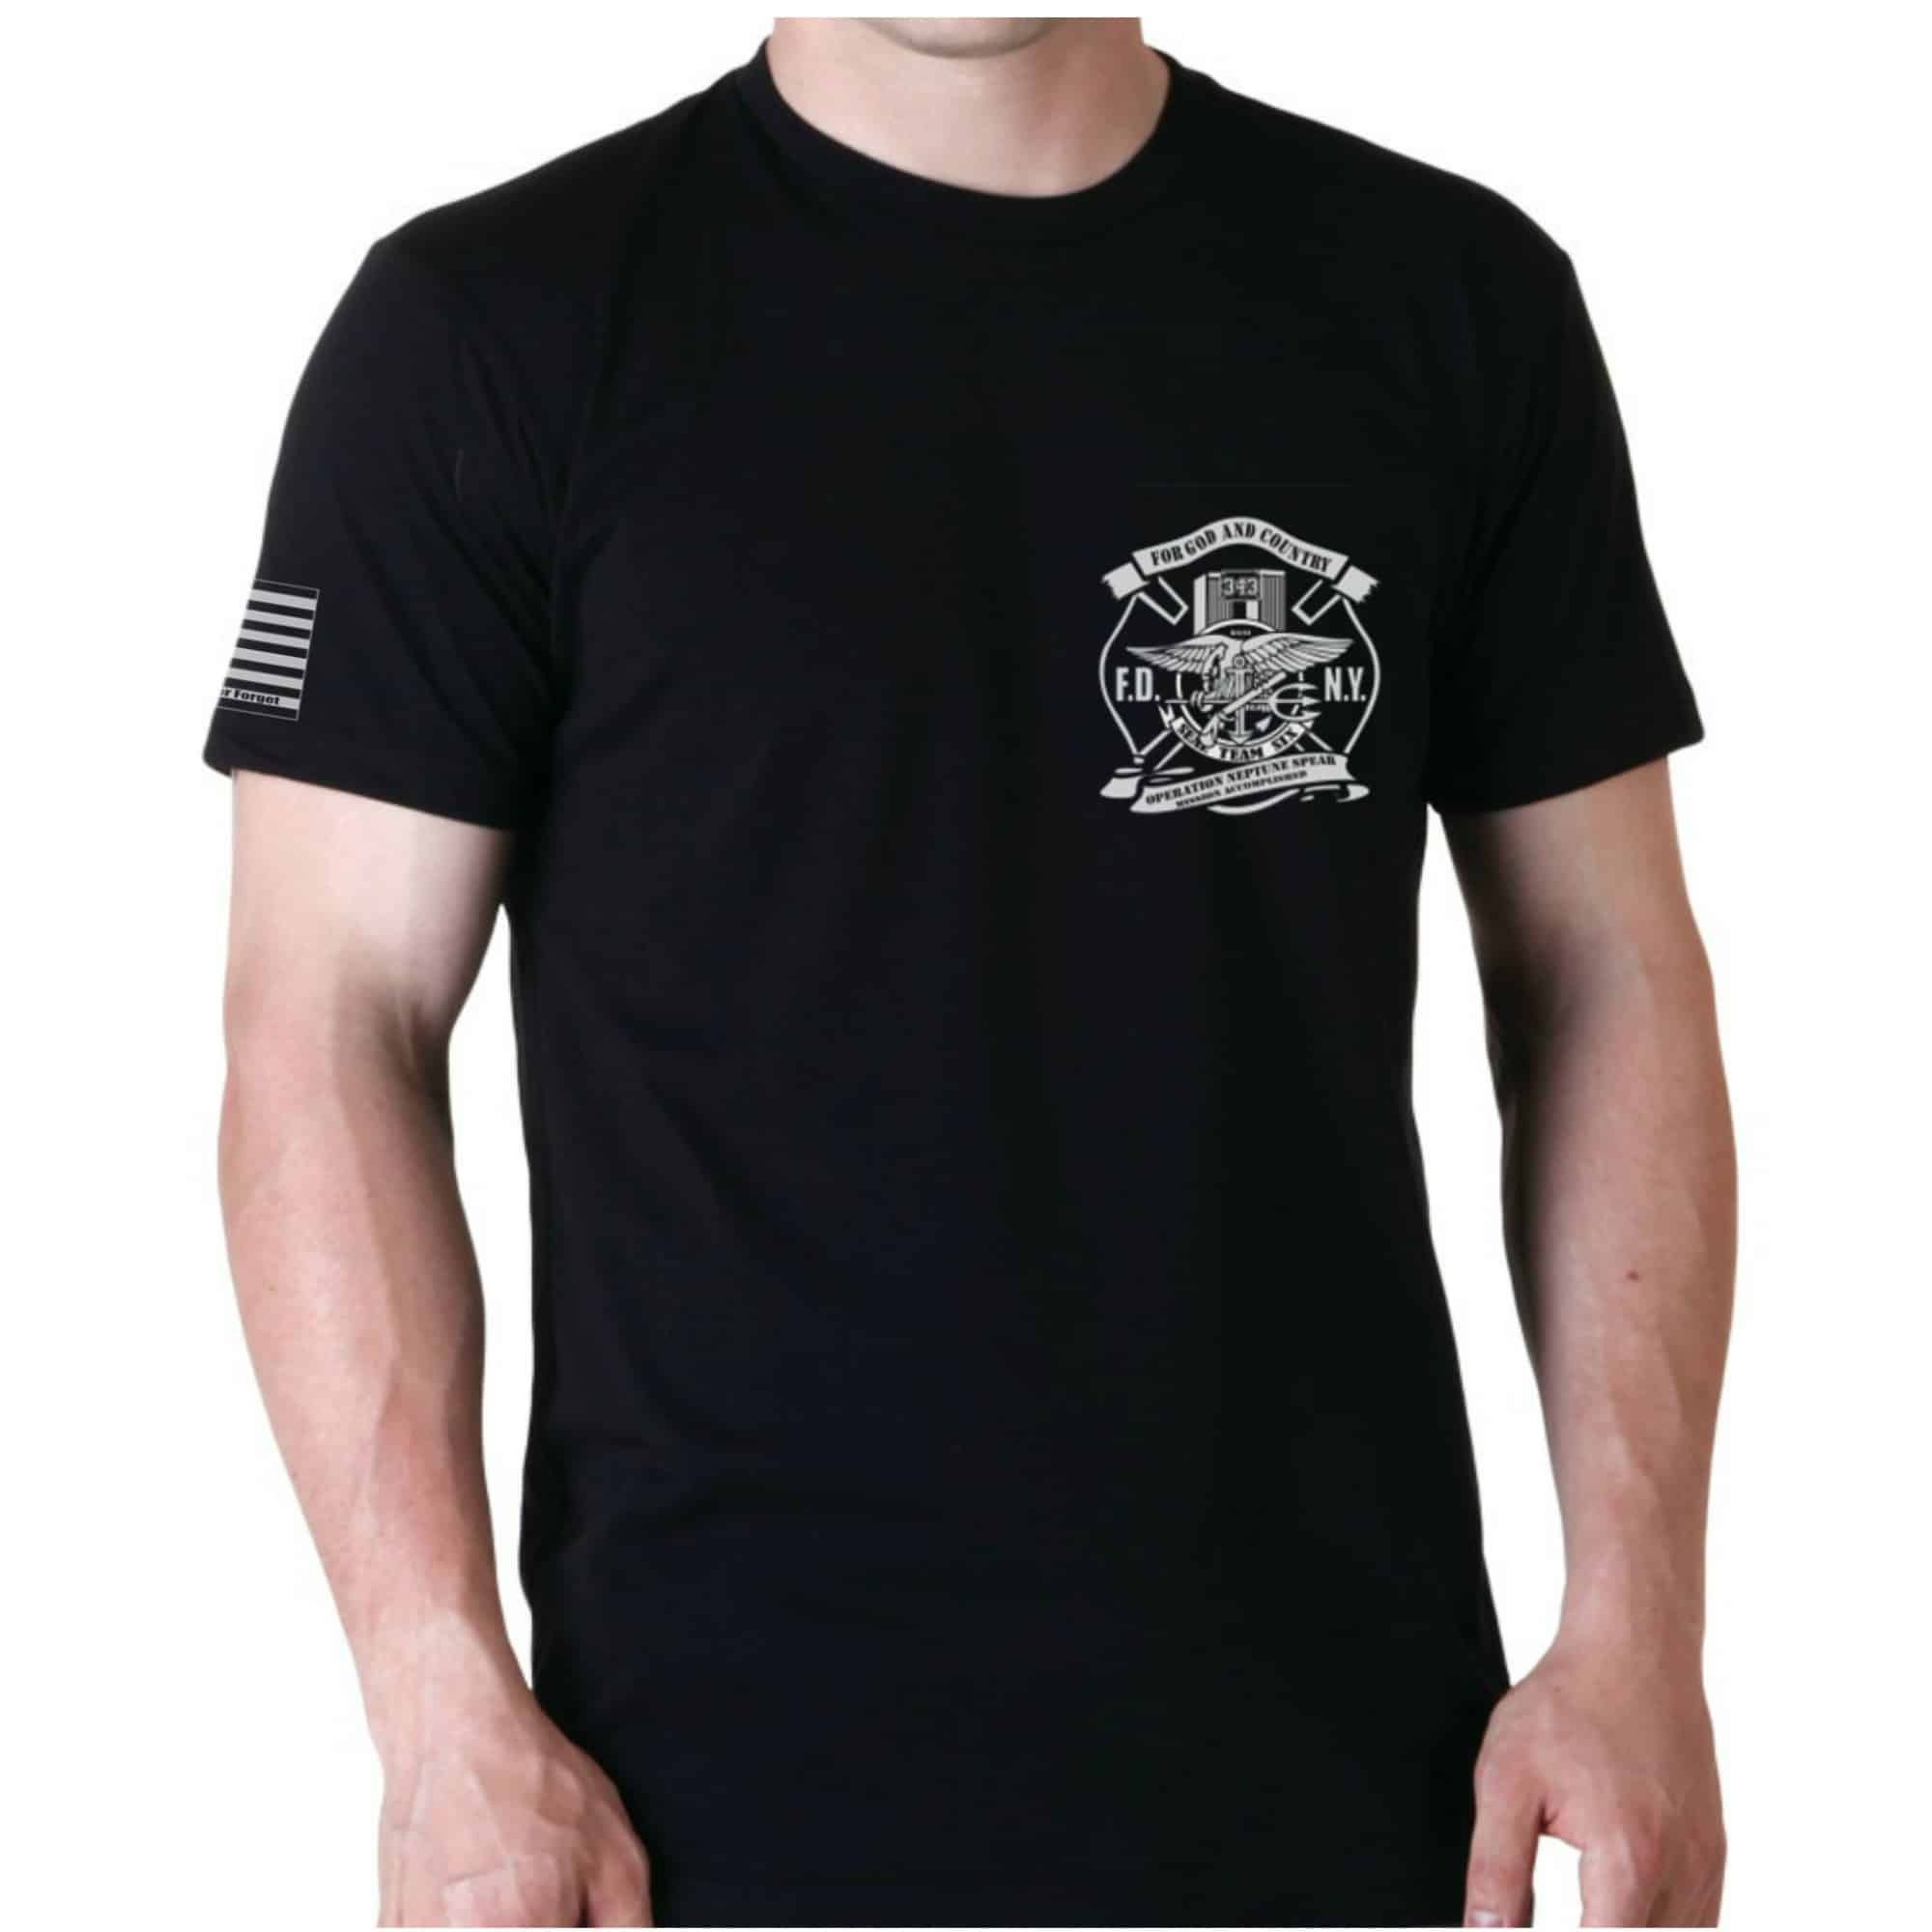 SUPPORT OUR TROOPS – FDNY Shop